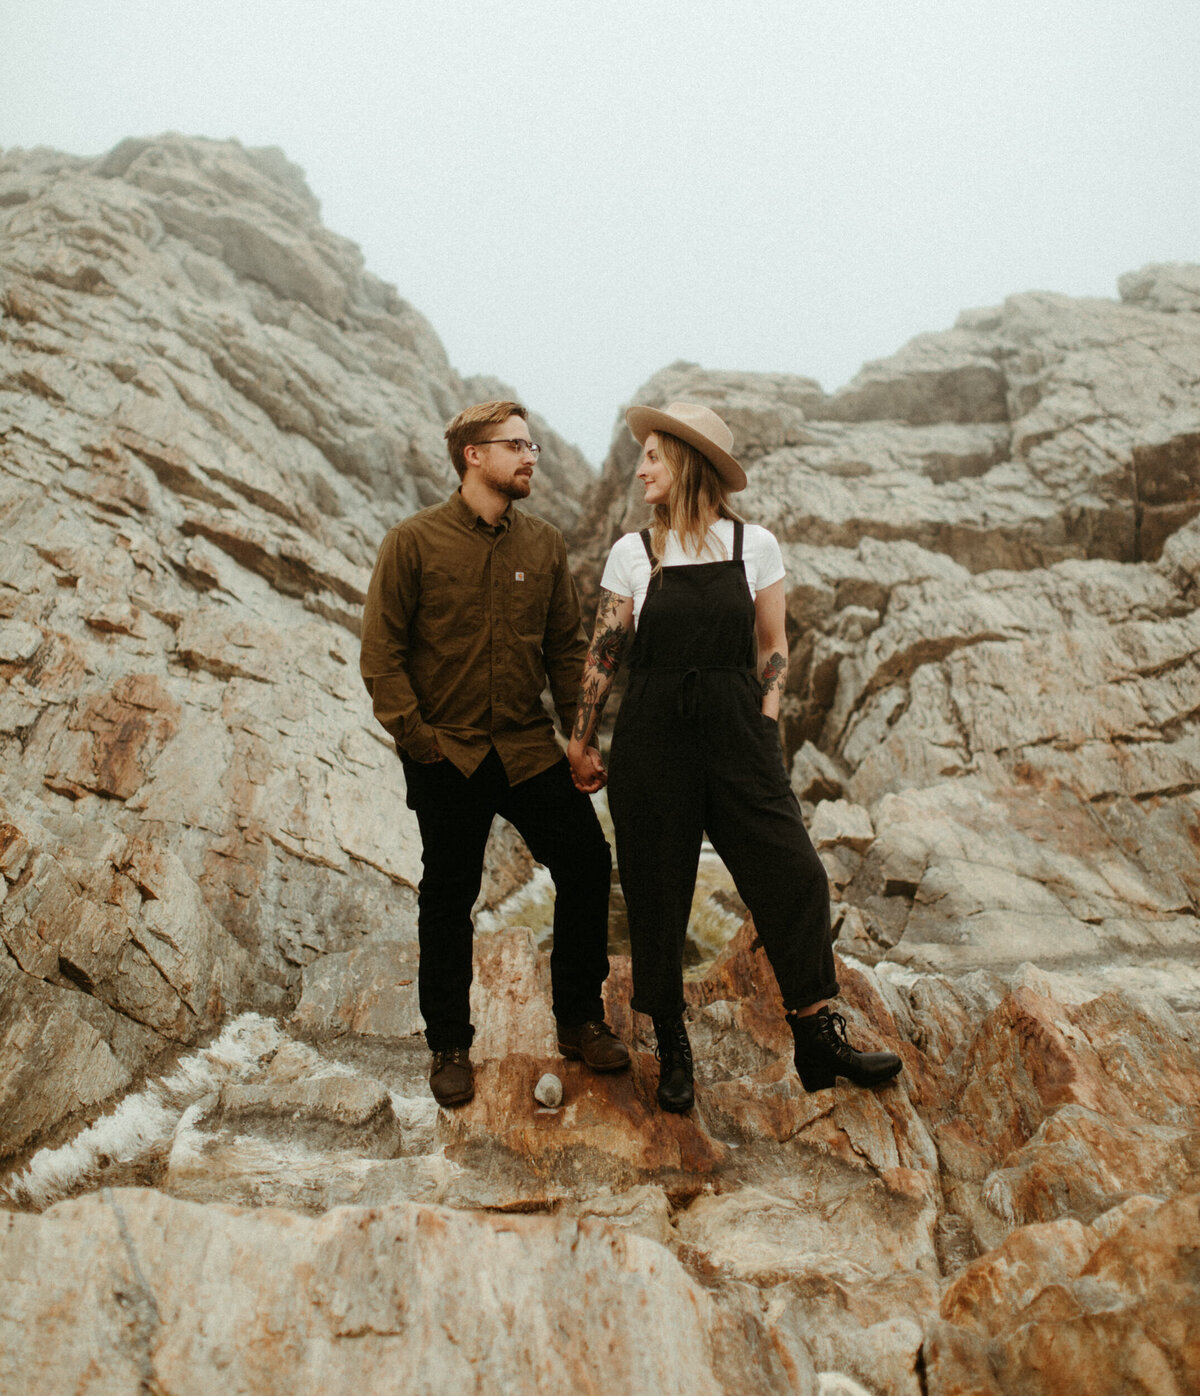 A girl wearing a wide brim hat, black overalls and boots holds hands with a guy wearing an olive green shirt and black pants as they stand on a rocky shoreline on a foggy day.